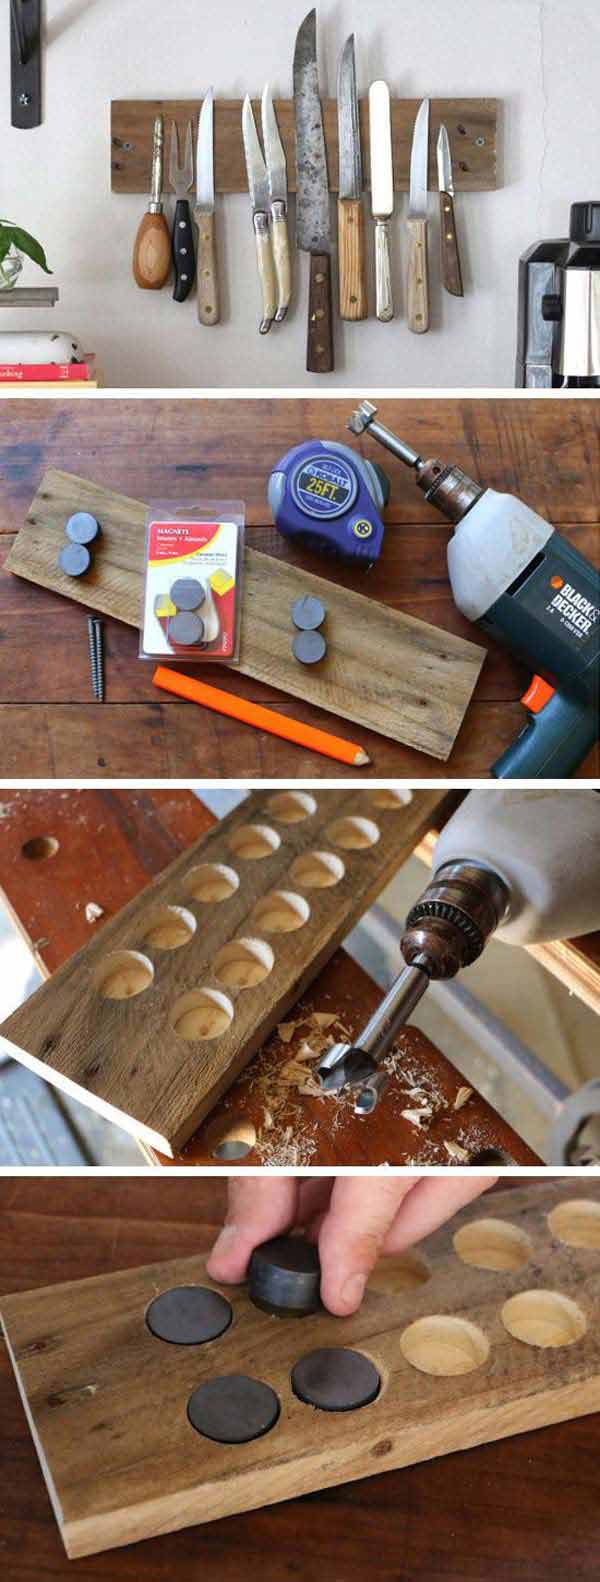 21 Insanely Cool DIY Projects That Will Amaze You